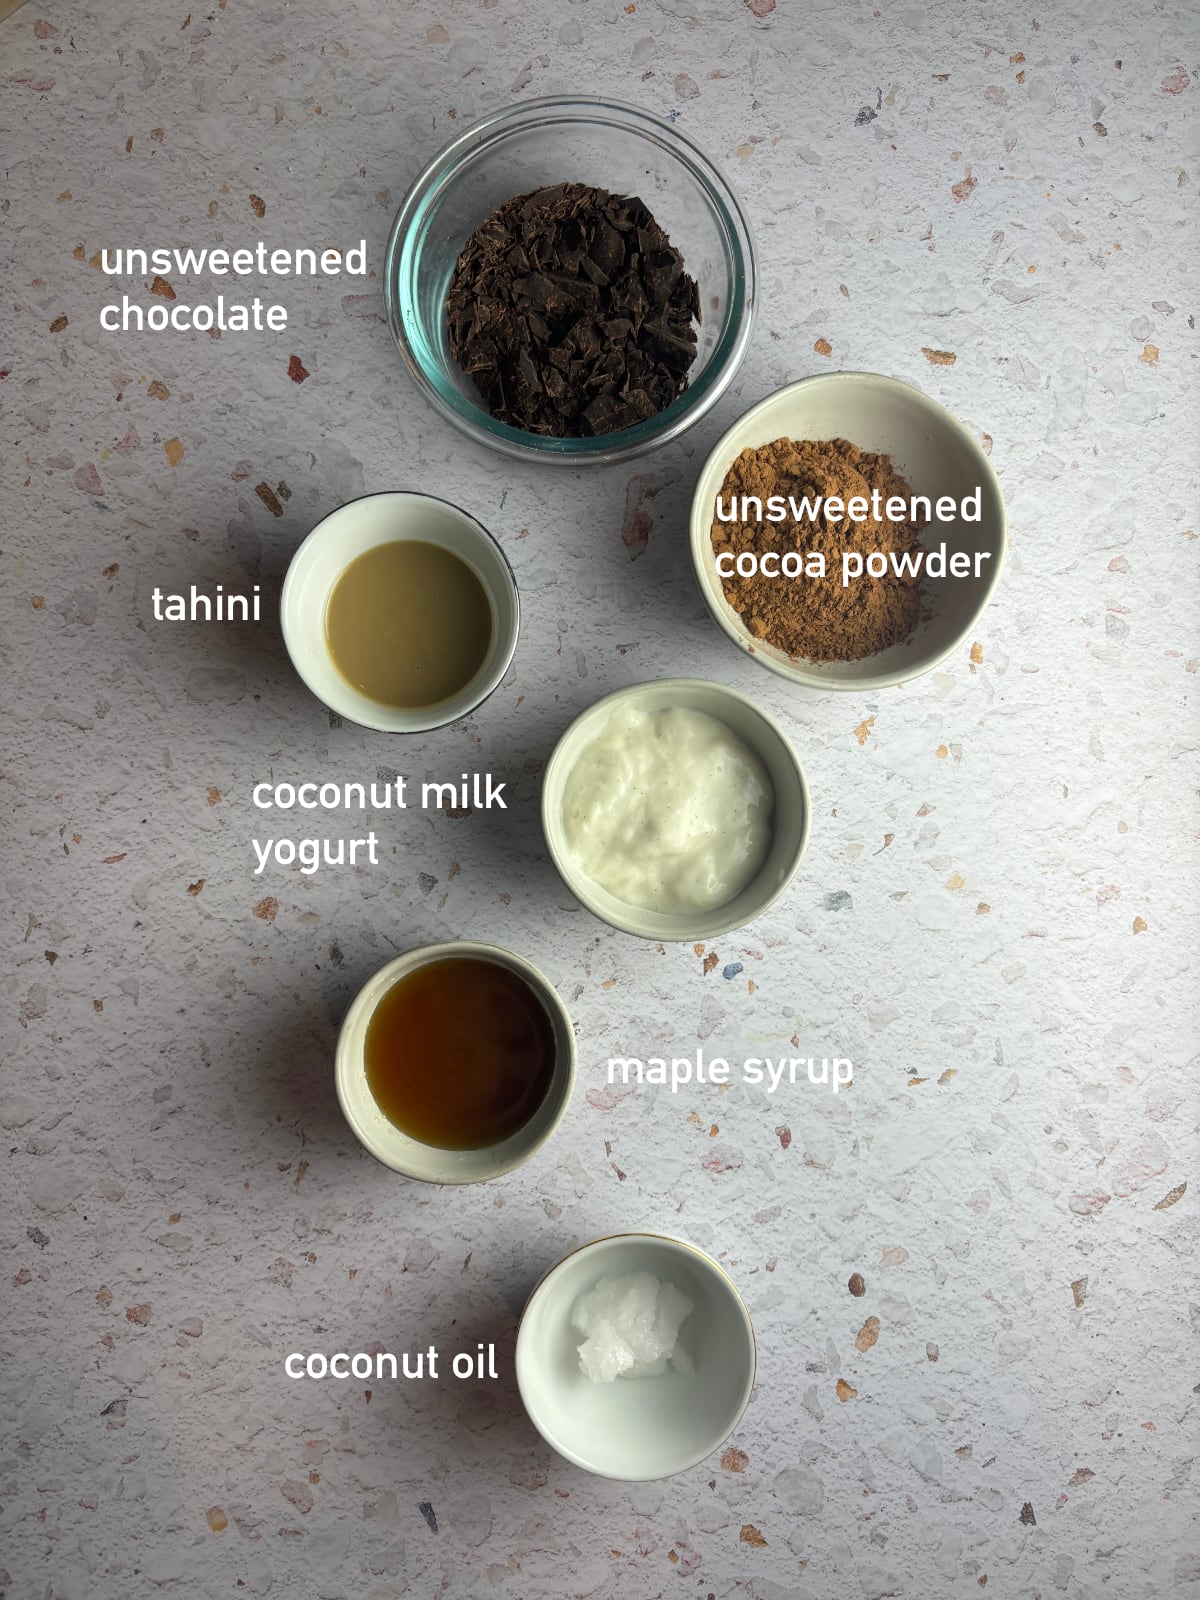 Overhead image of several small bowls each filled with the ingredients to make Vegan Chocolate Truffles